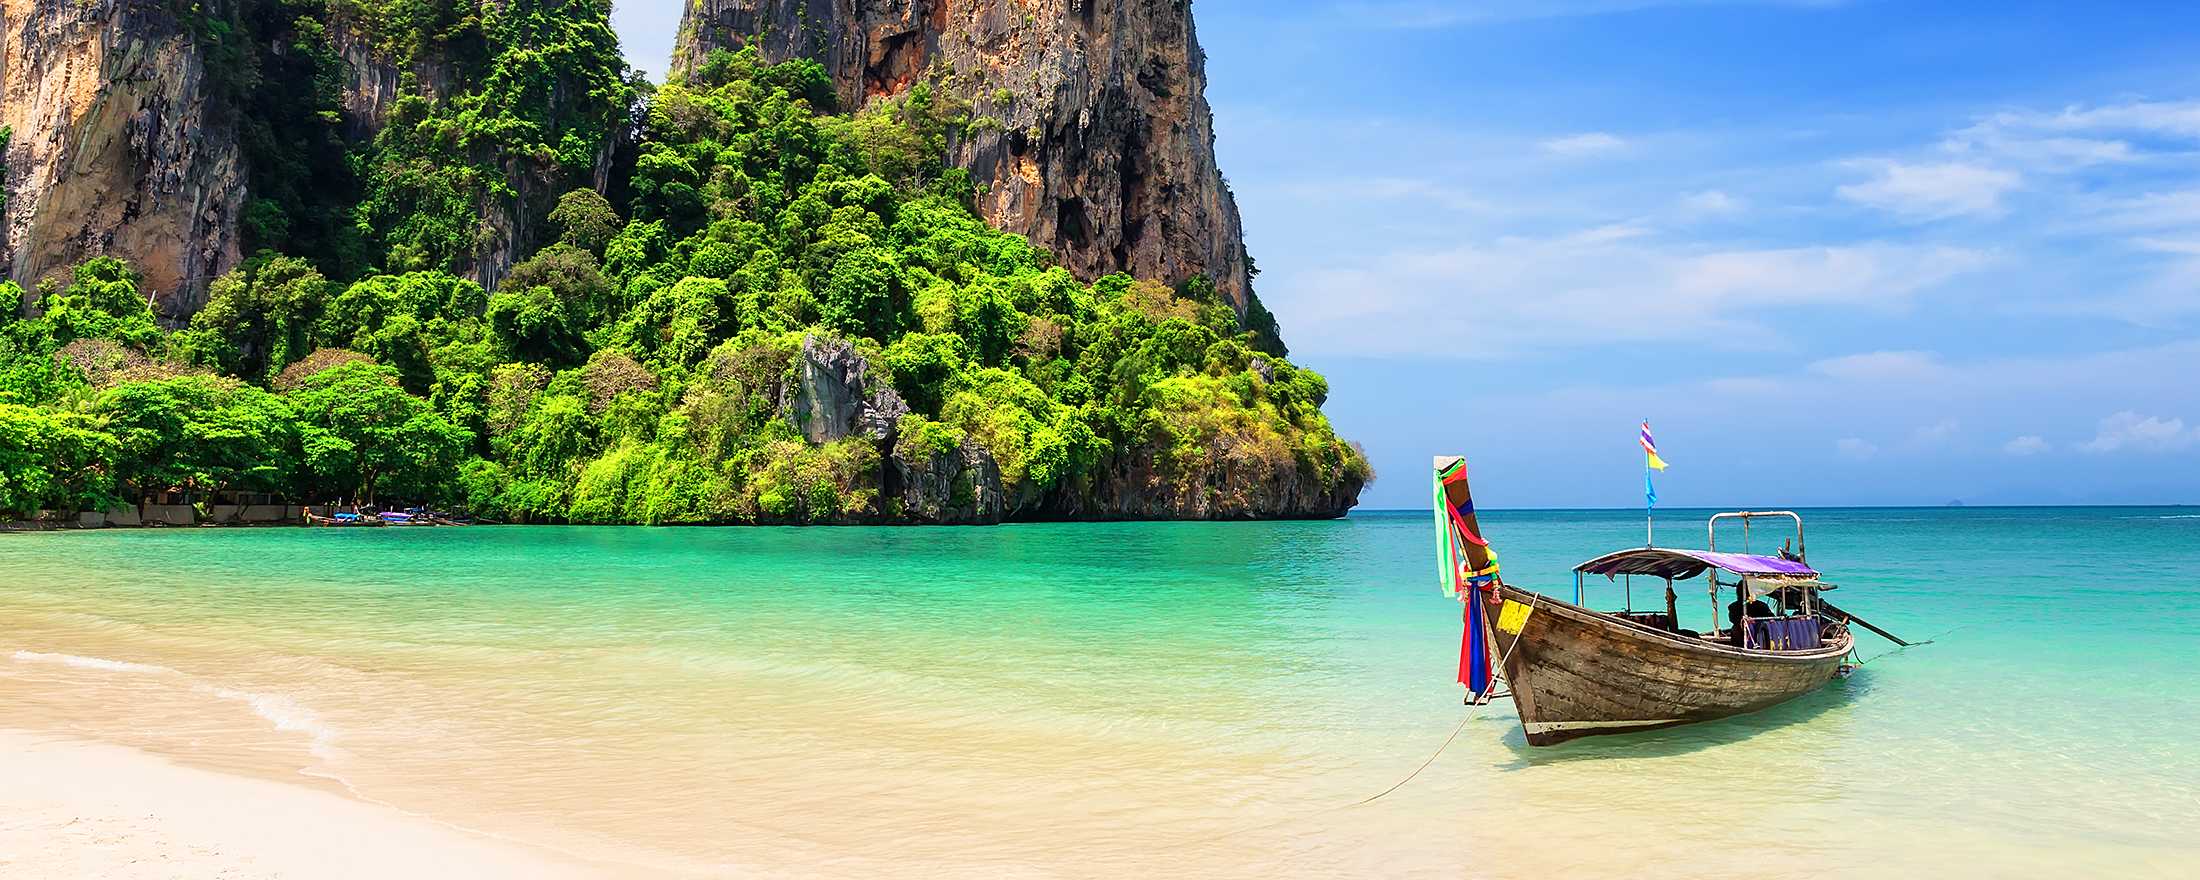 Thailand travel guide: all you need to know - Times Travel